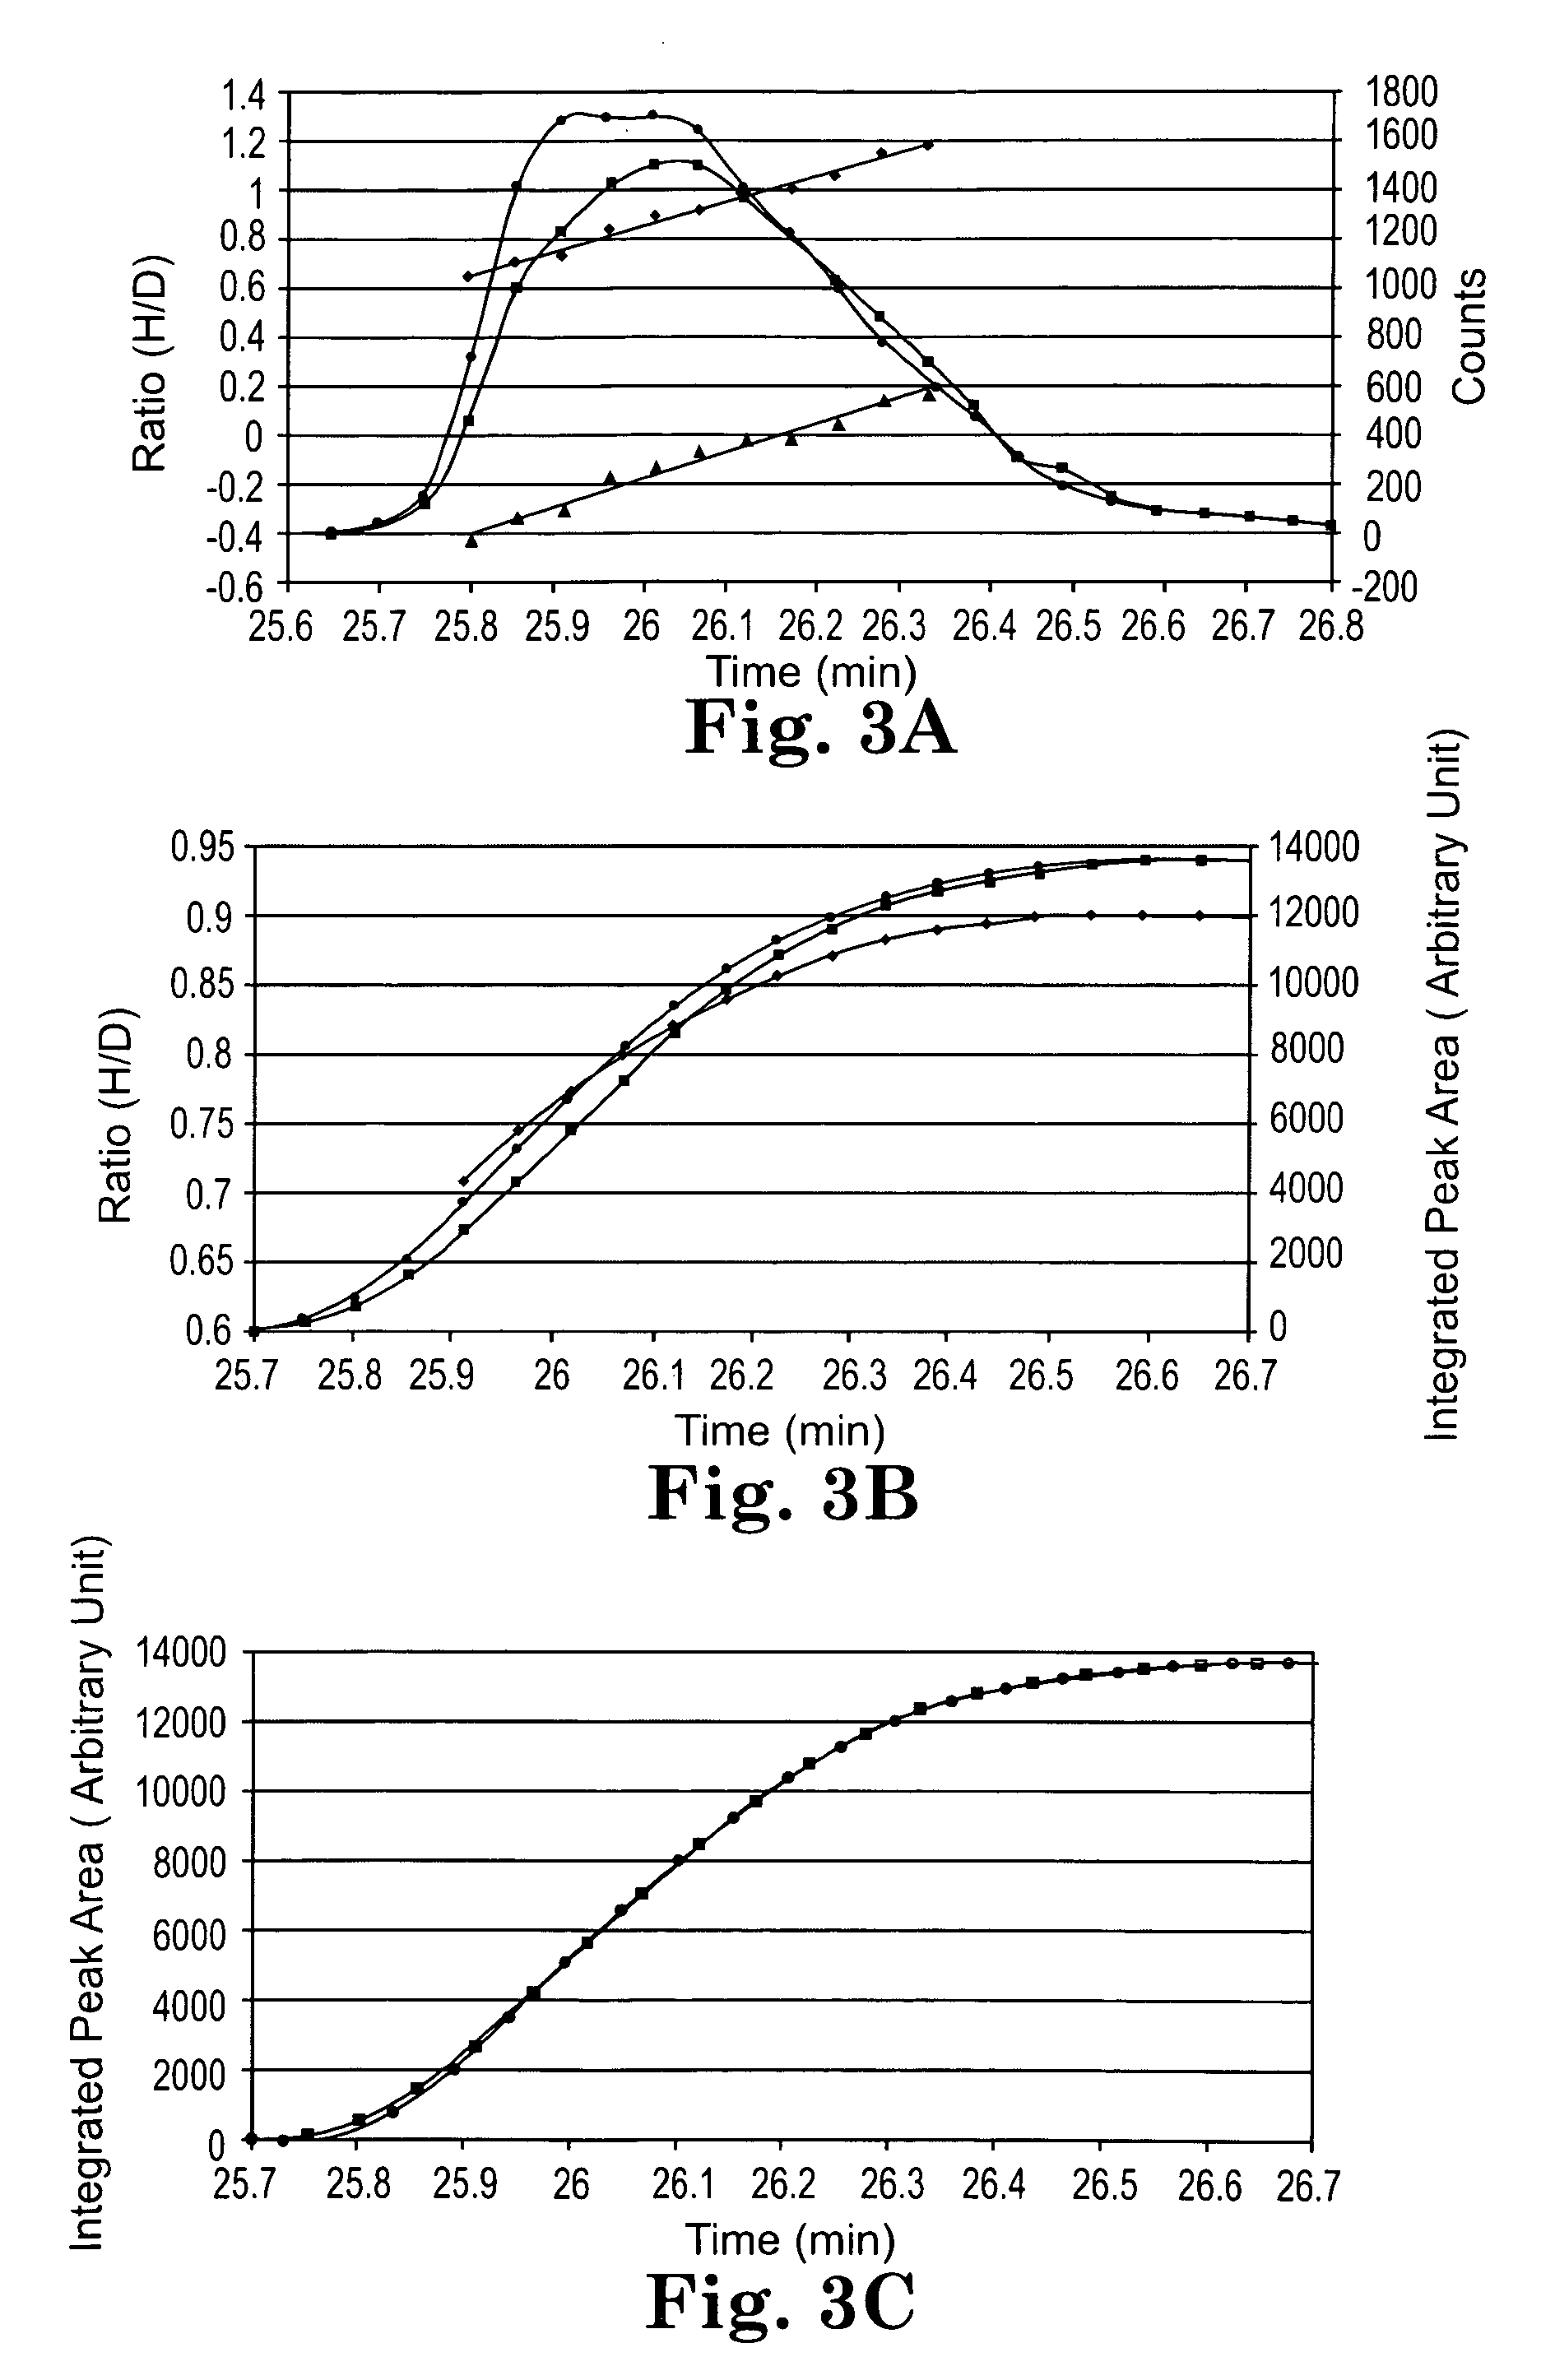 Materials and methods for controlling isotope effects during fractionation of analytes